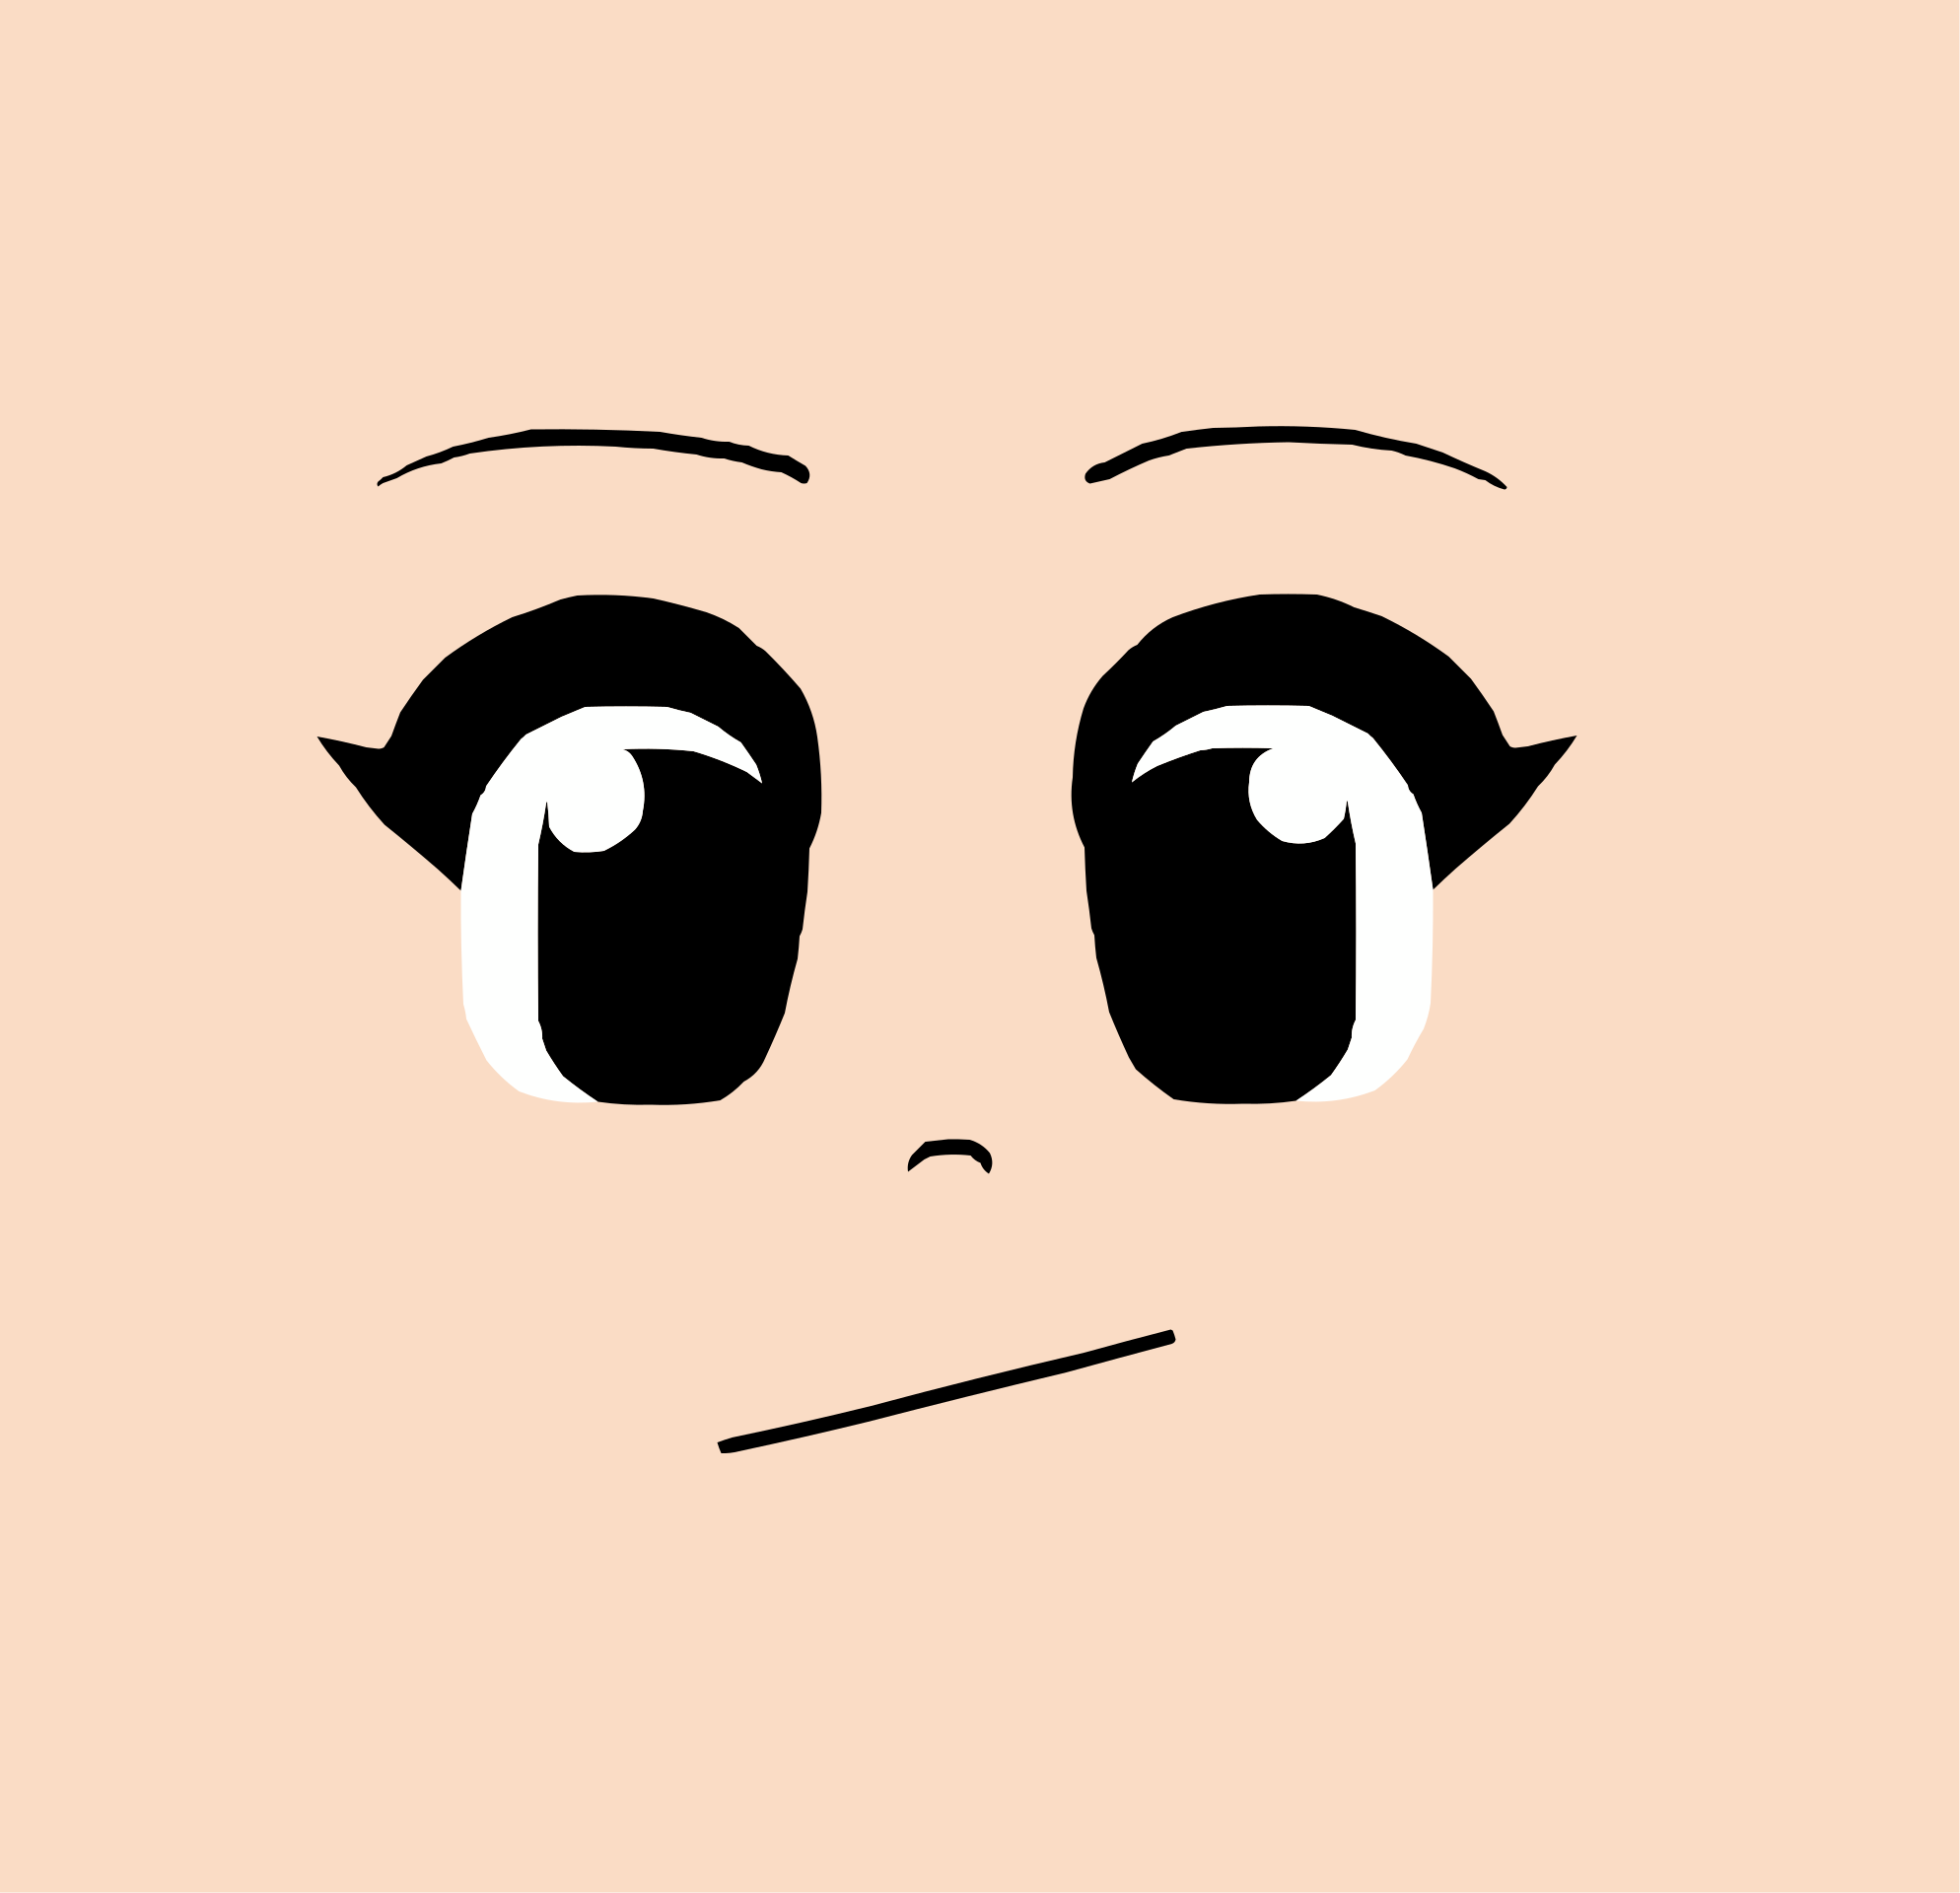 Roblox man face by Ph0s4 on Newgrounds